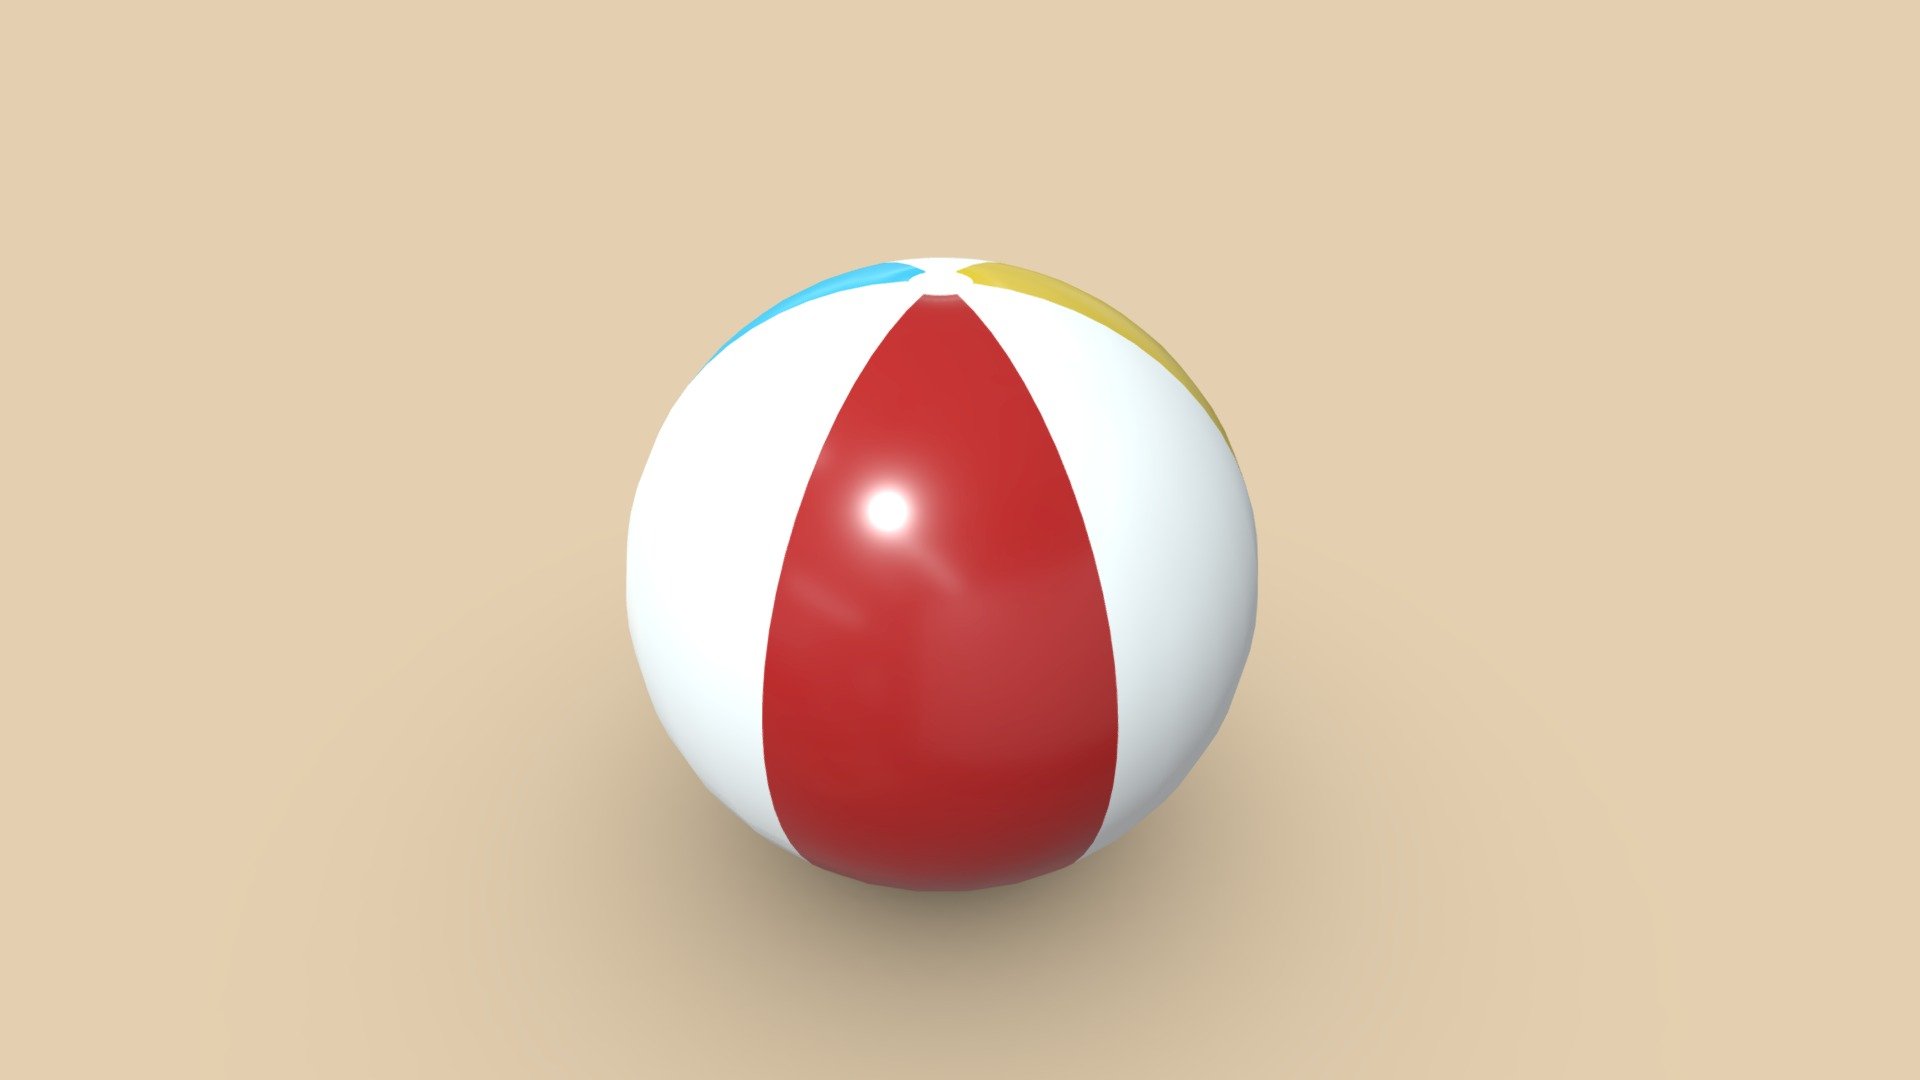 For Day 27 of Nodevember, I made a beach ball. But like a really big one. You know those giant beach balls they bounce on top of crowds at beach concerts? I modeled one of those big beach balls 3d model